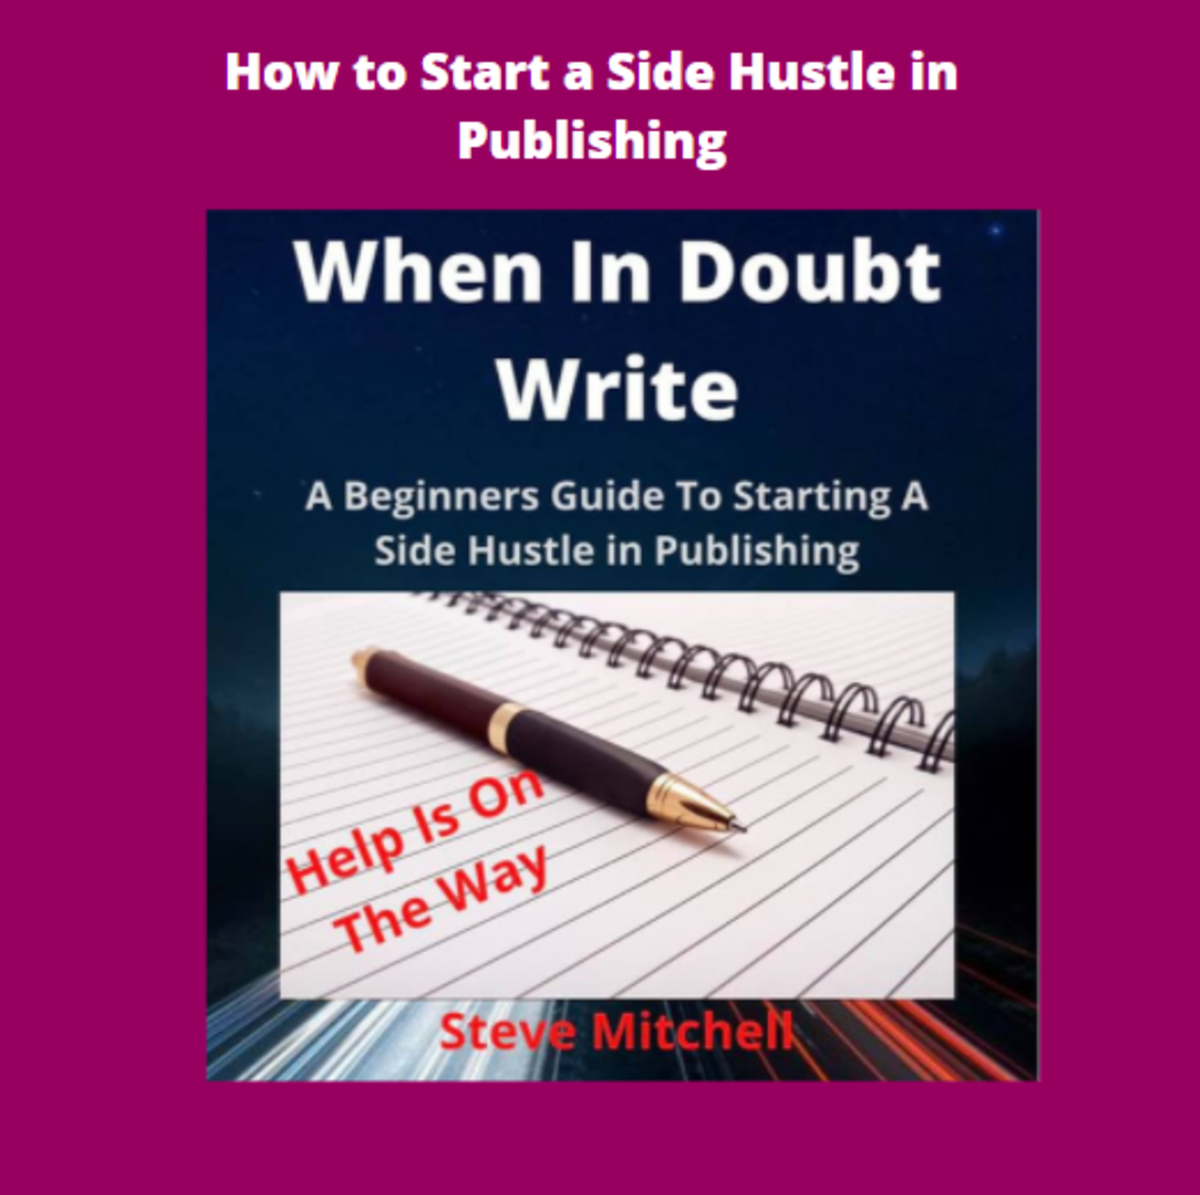 How to Start a Side Hustle in Publishing.